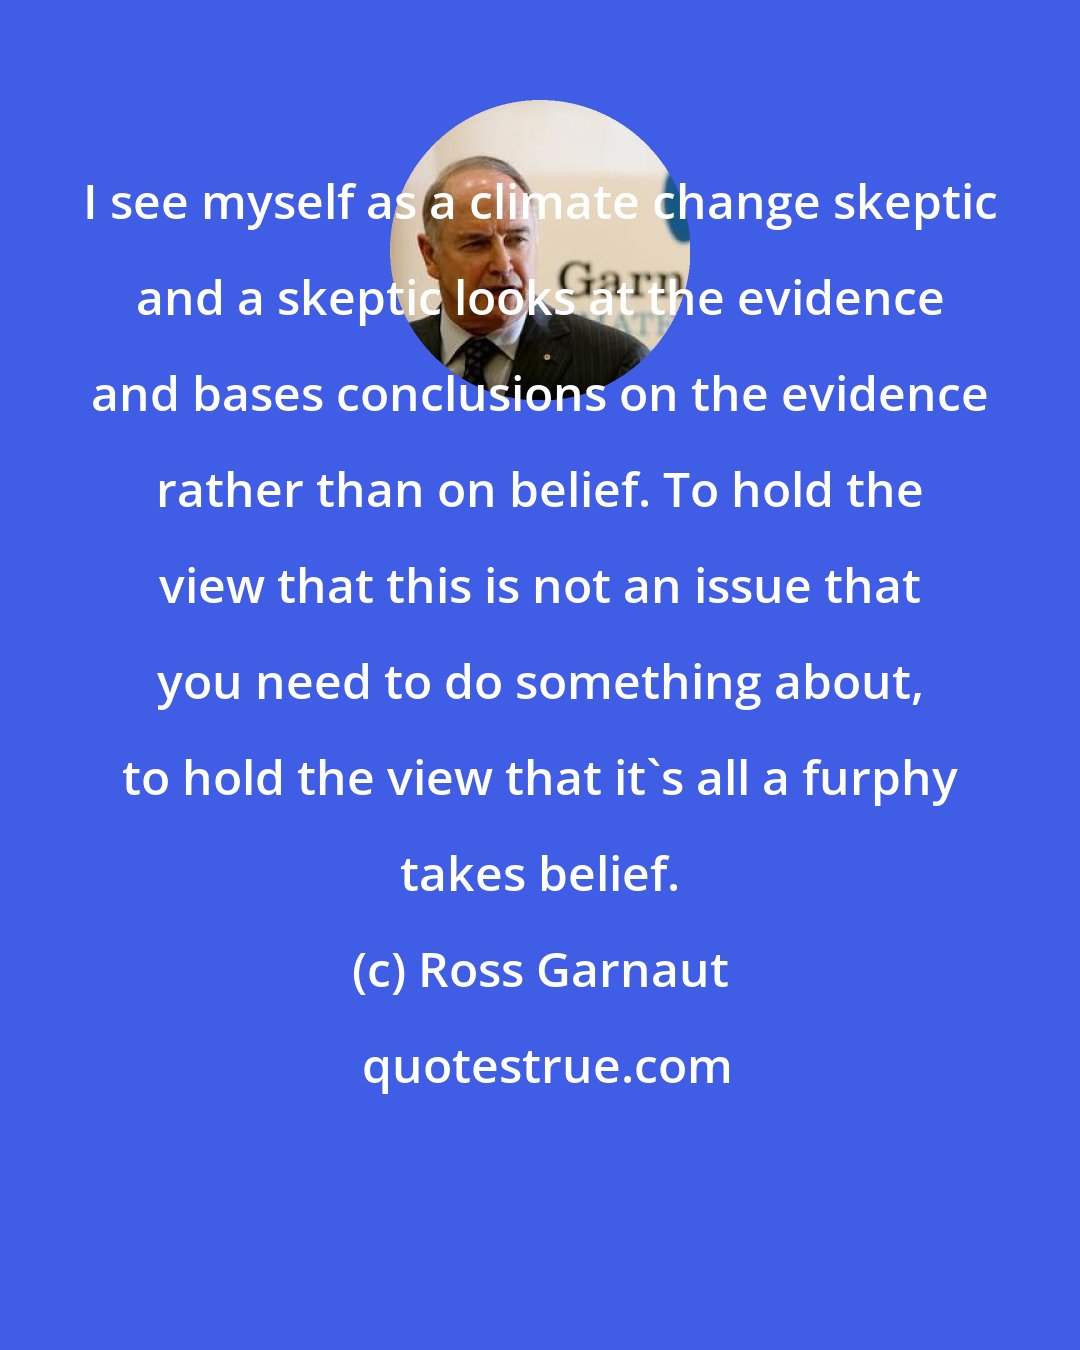 Ross Garnaut: I see myself as a climate change skeptic and a skeptic looks at the evidence and bases conclusions on the evidence rather than on belief. To hold the view that this is not an issue that you need to do something about, to hold the view that it's all a furphy takes belief.